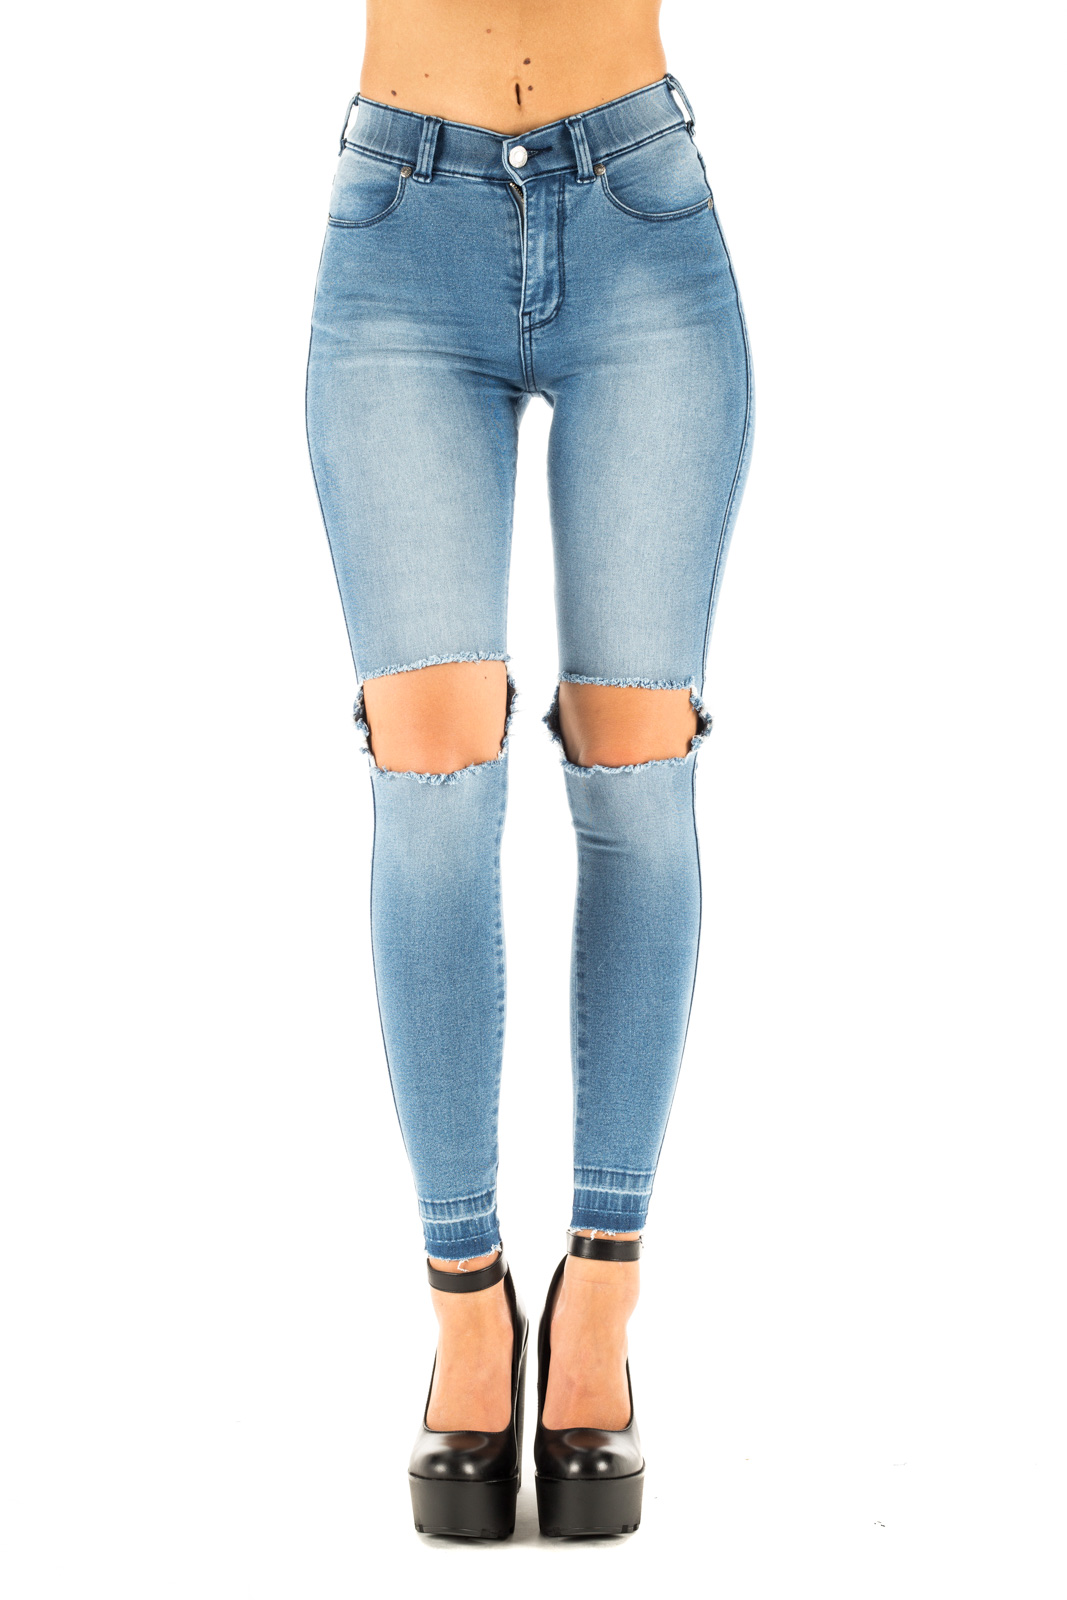 Dr. Denim - Lexy super skinny Jeans with tears